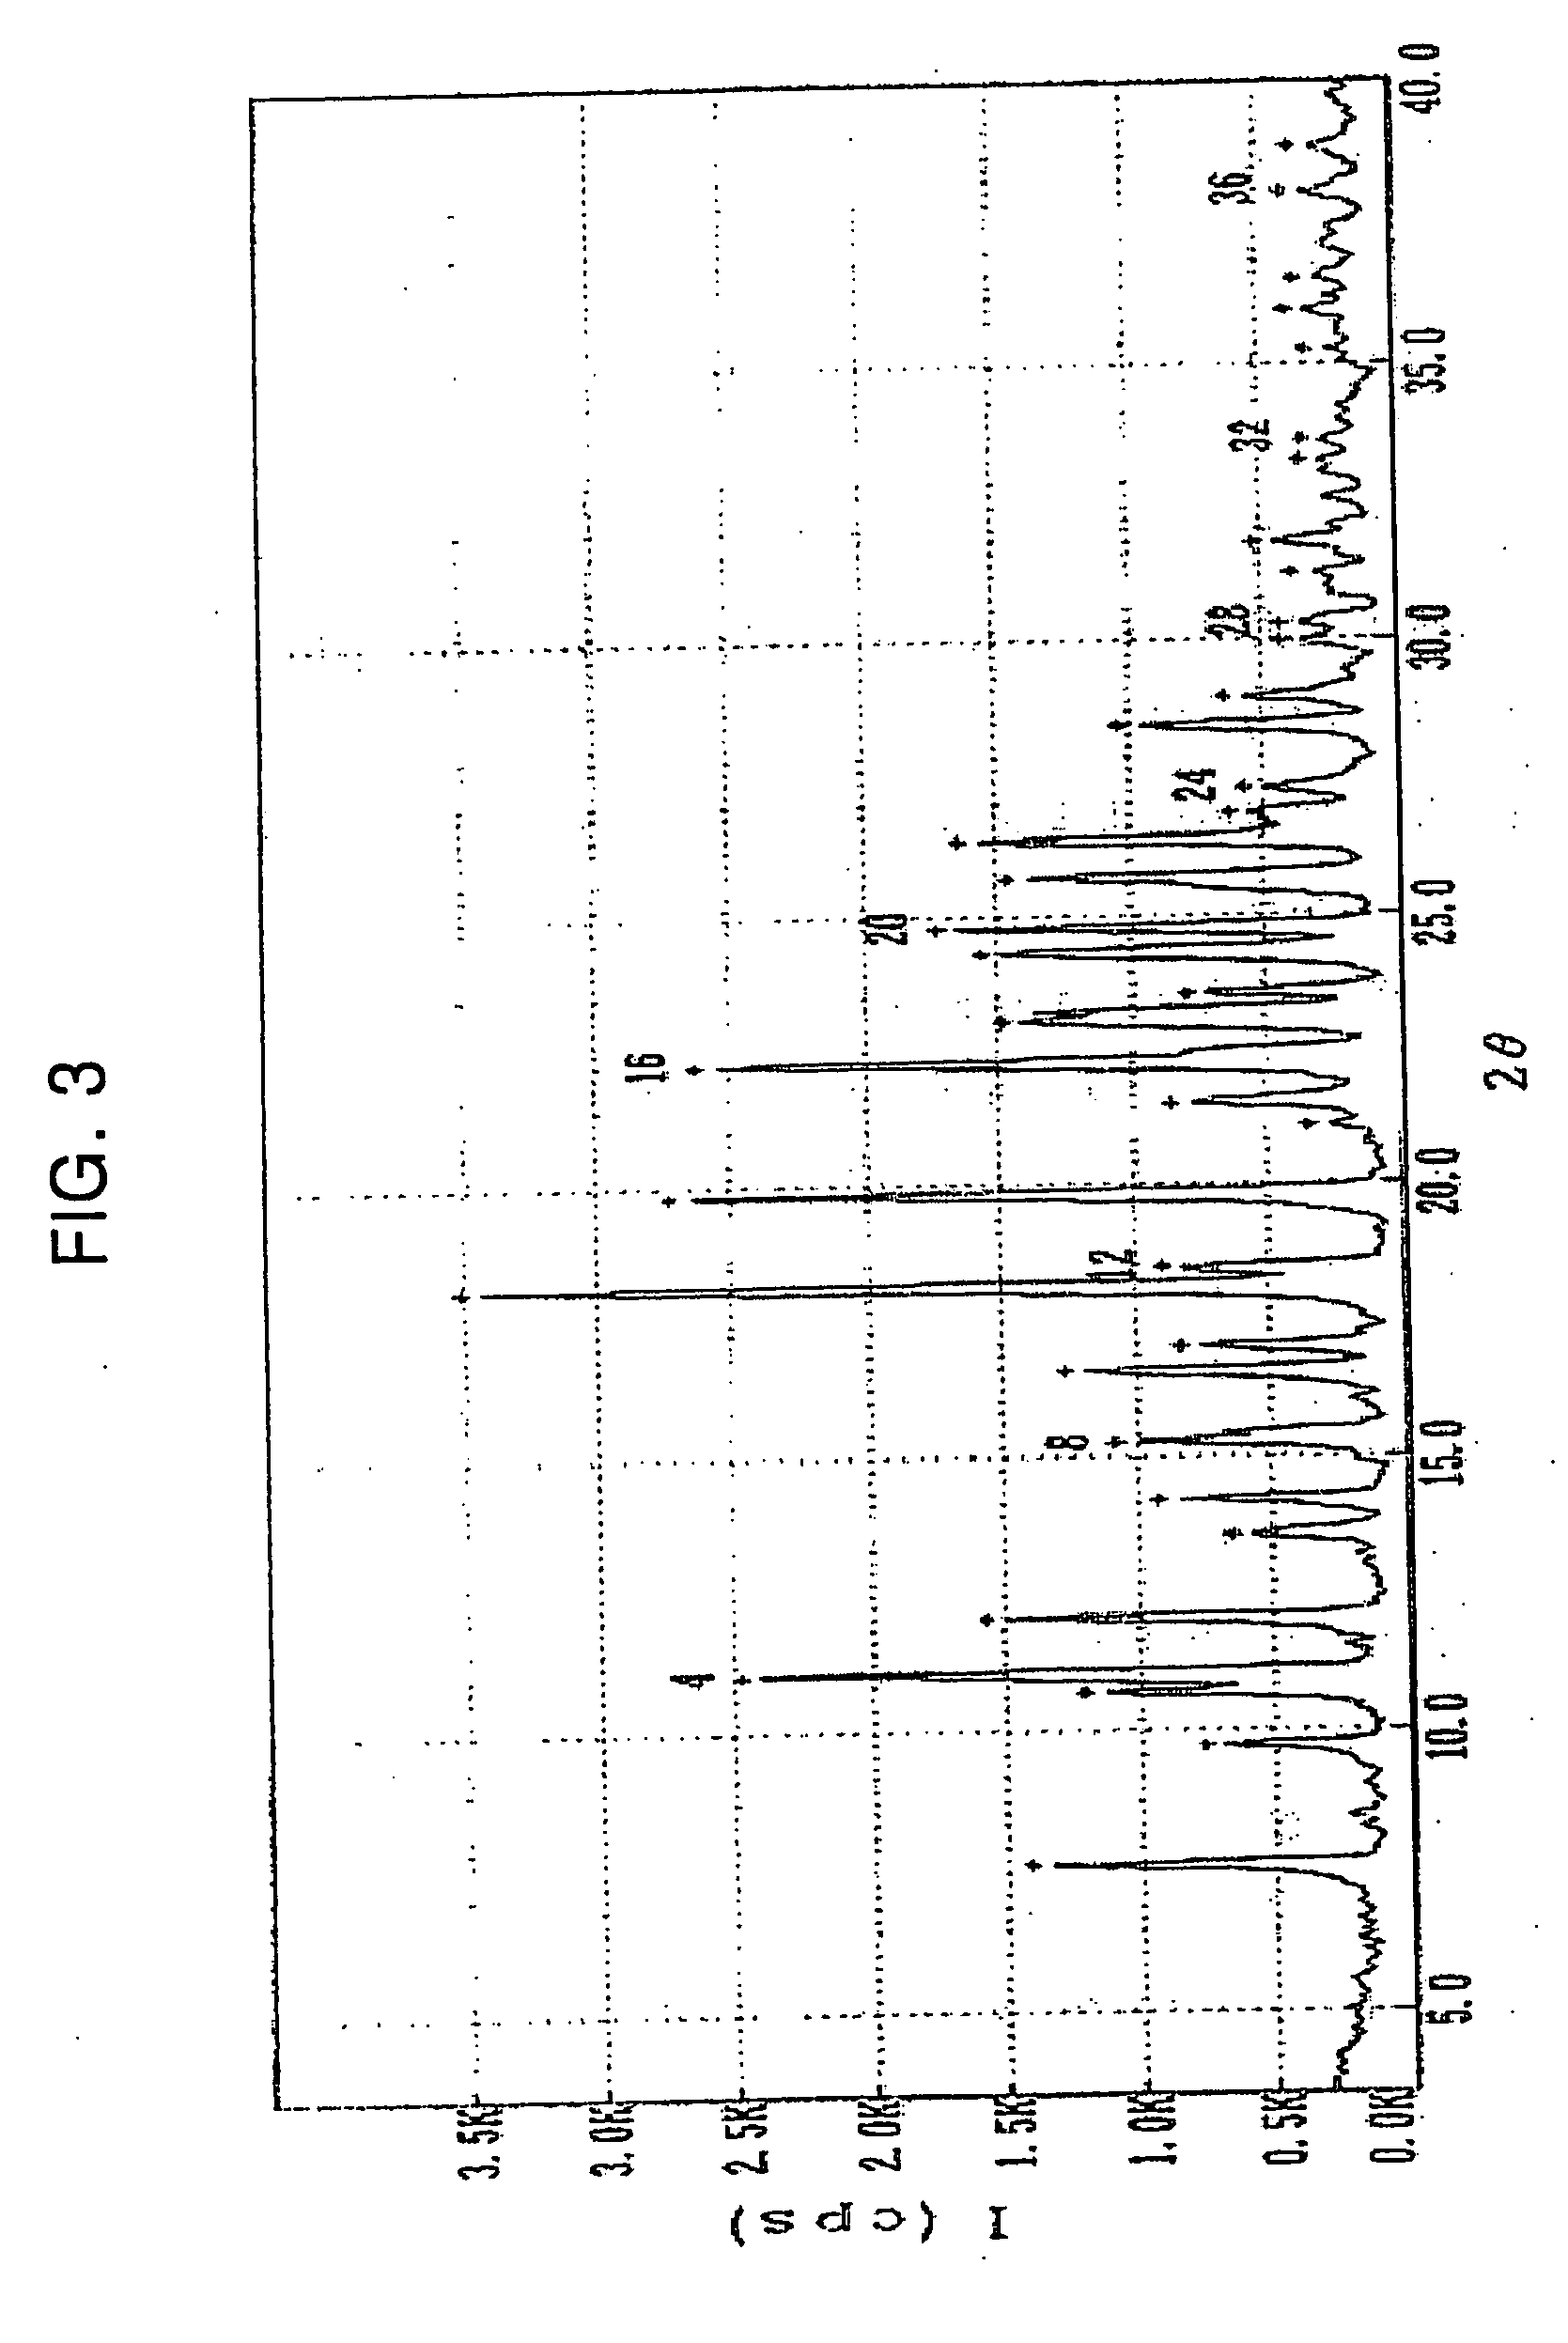 Crystalline clopidogrel naphthalenesulfonate or hydrate thereof, method for preparing same and pharmaceutical composition containing same